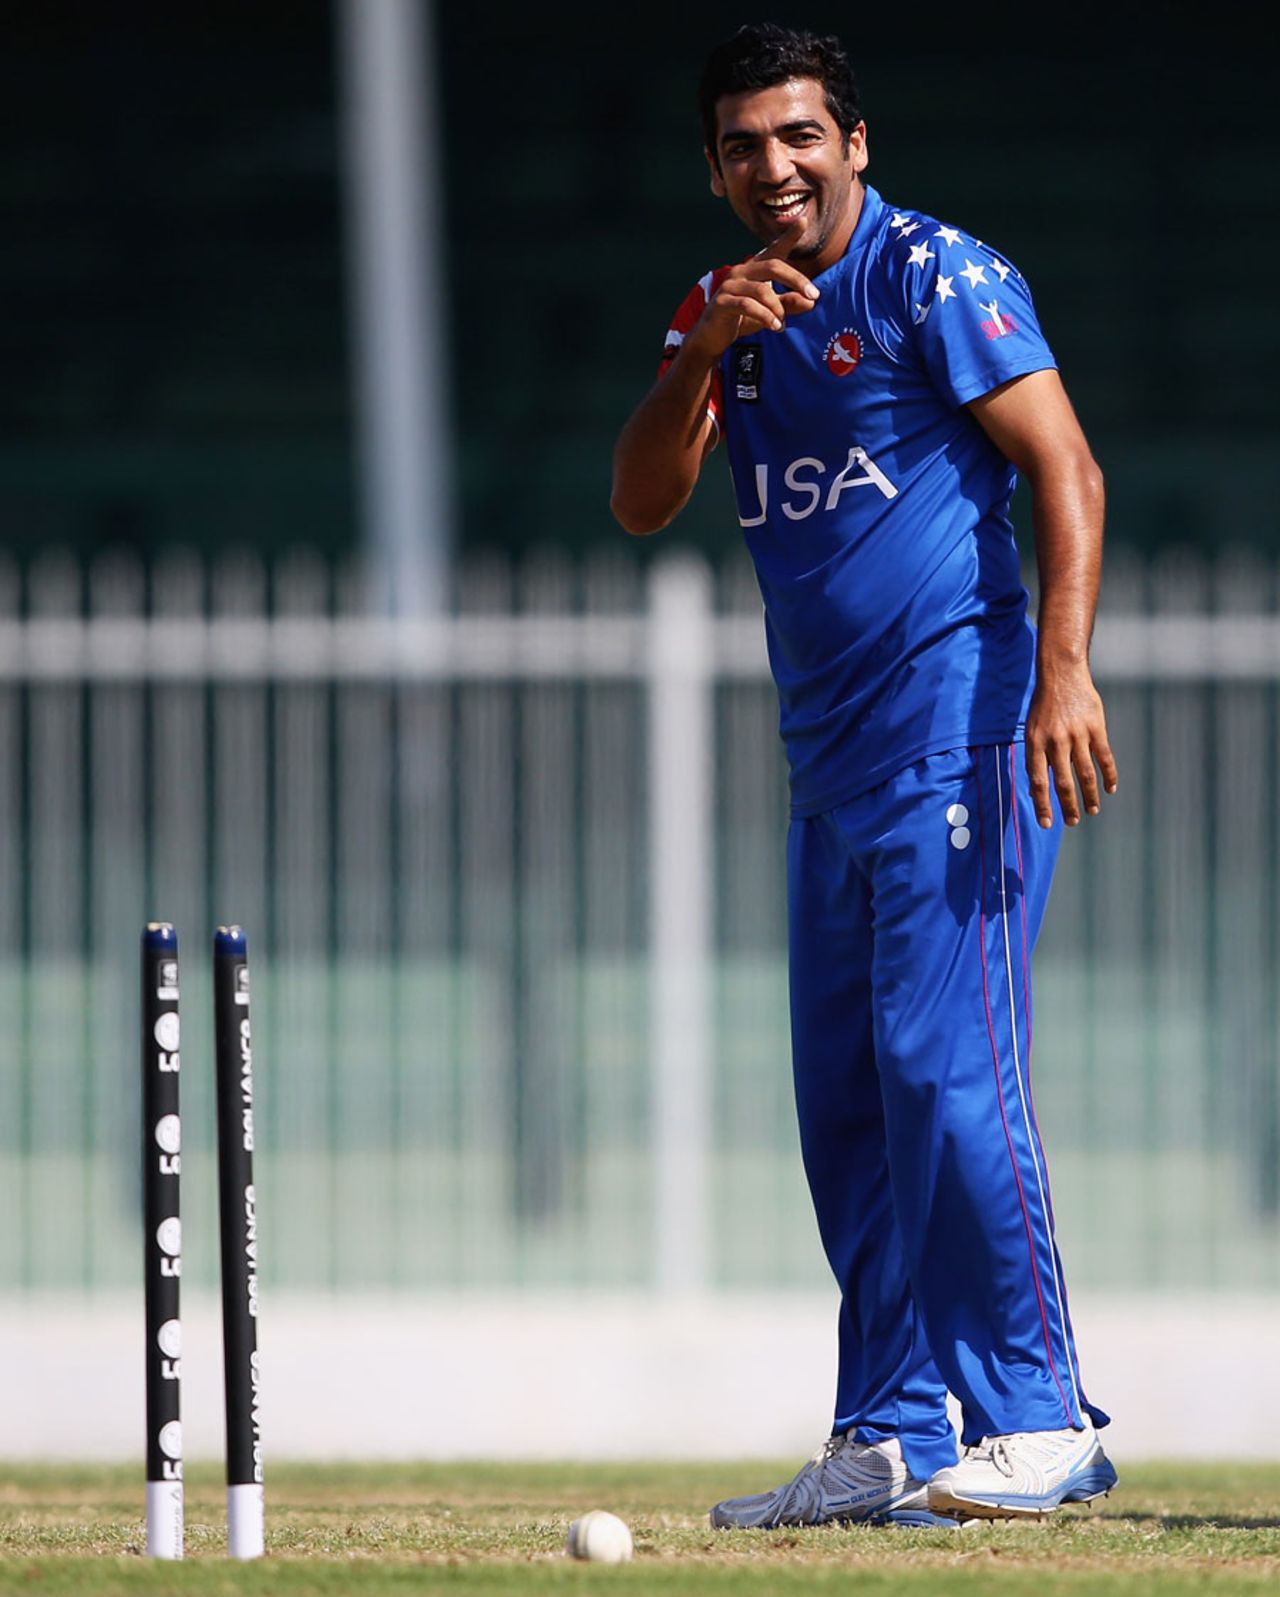 Imran Awan picked up two wickets in the 19th over, United States of America v Denmark, ICC World Twenty20 Qualifier, 15th place play-off, Sharjah, November 26, 2013